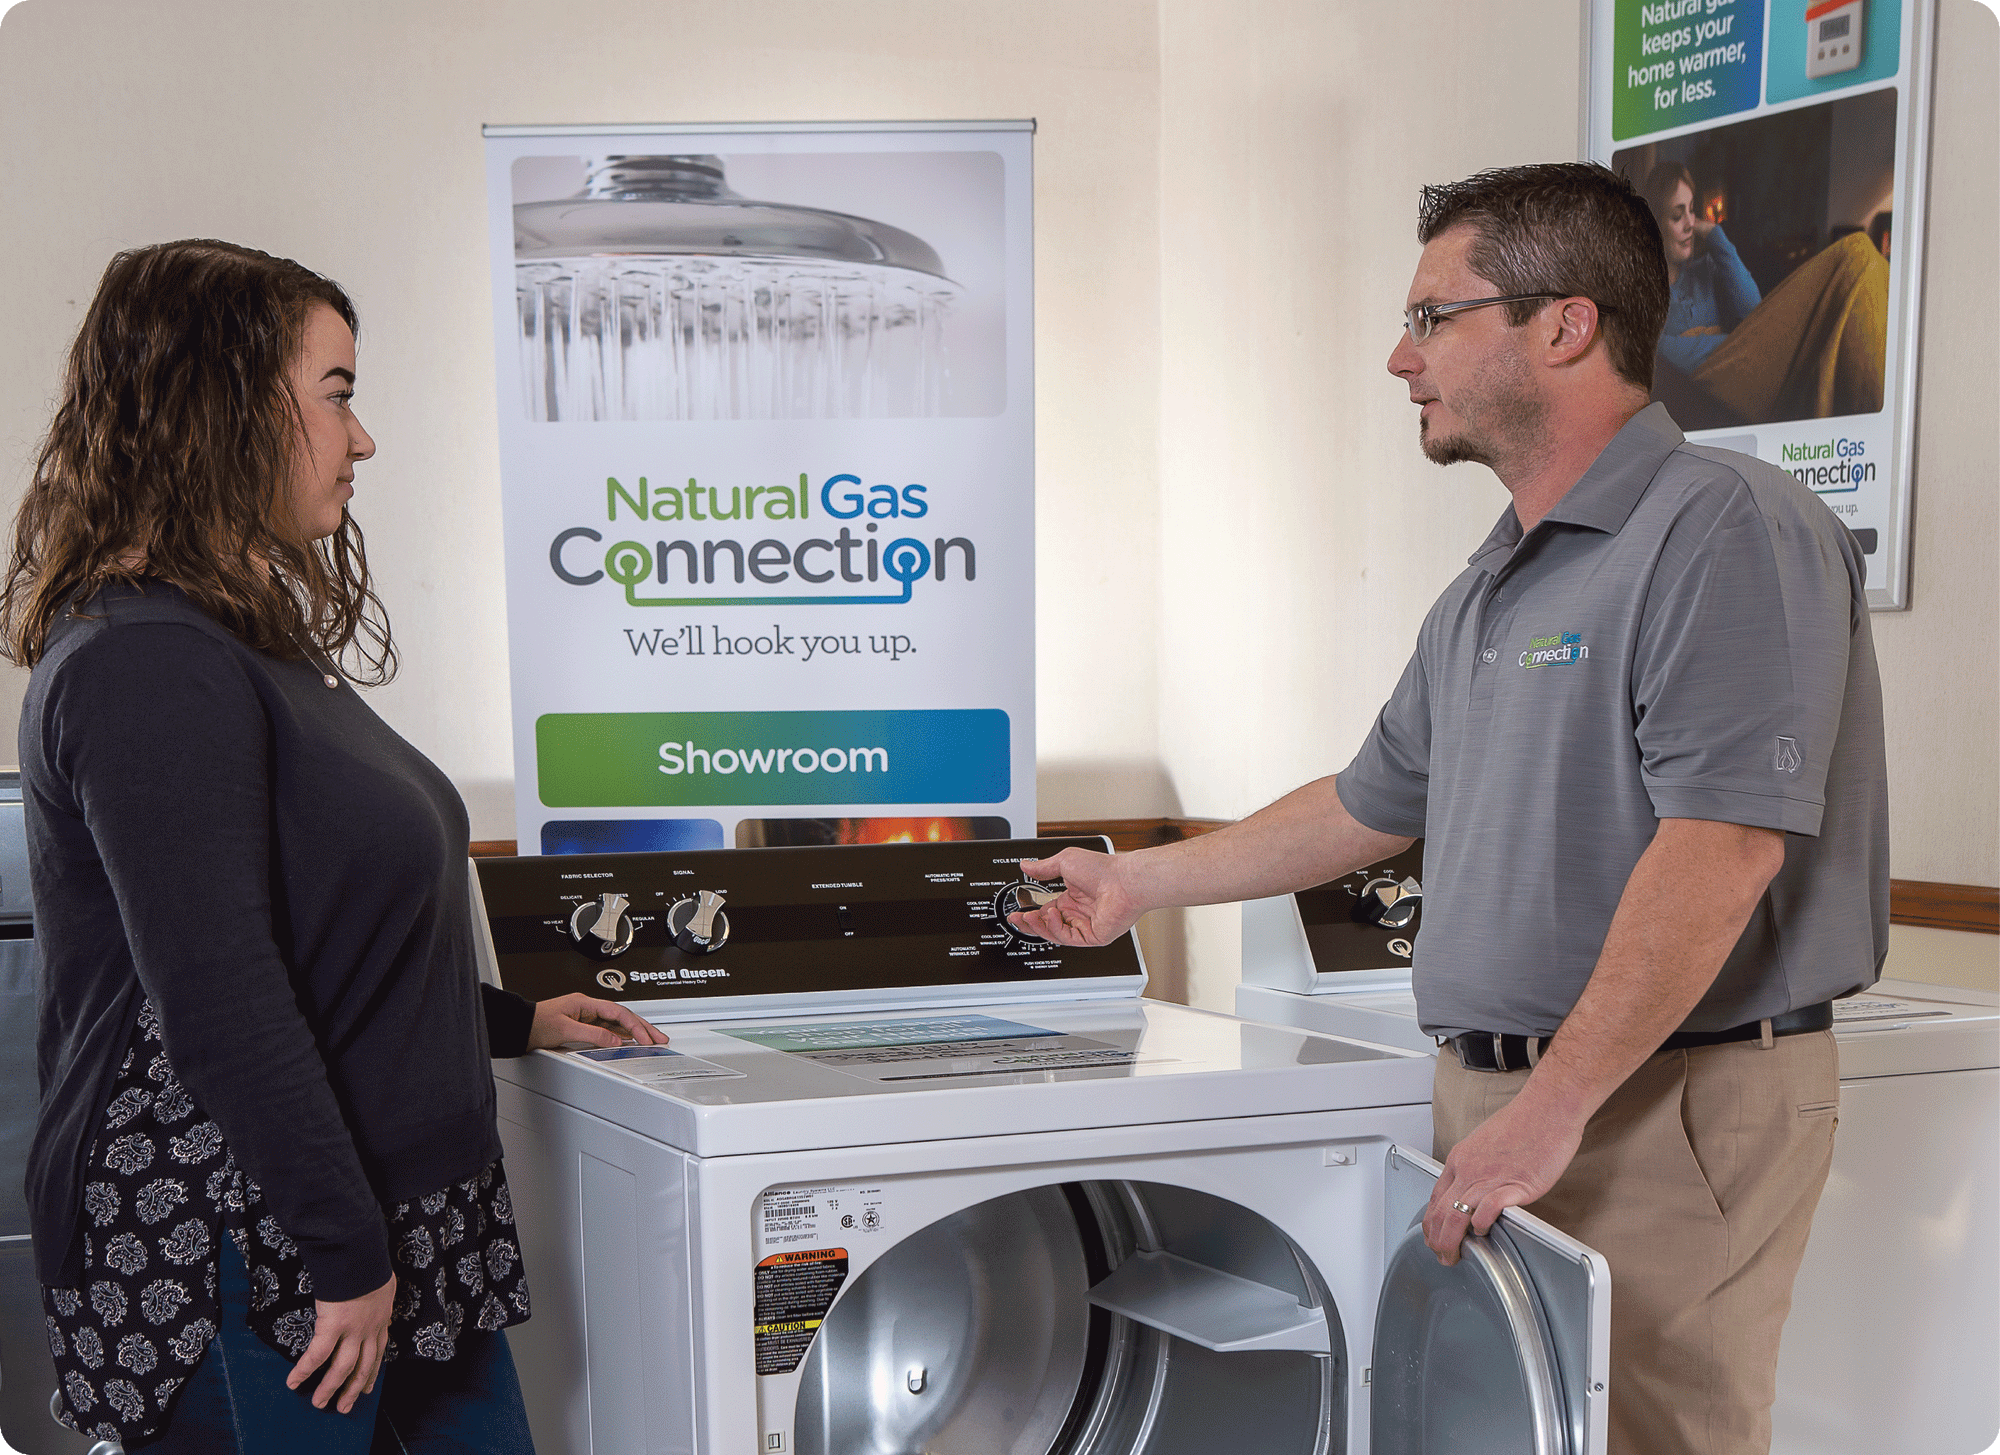 Sales associate discussing Speed Queen gas dryer with customer in appliance showroom, surrounded by business posters on Natural Gas Connection